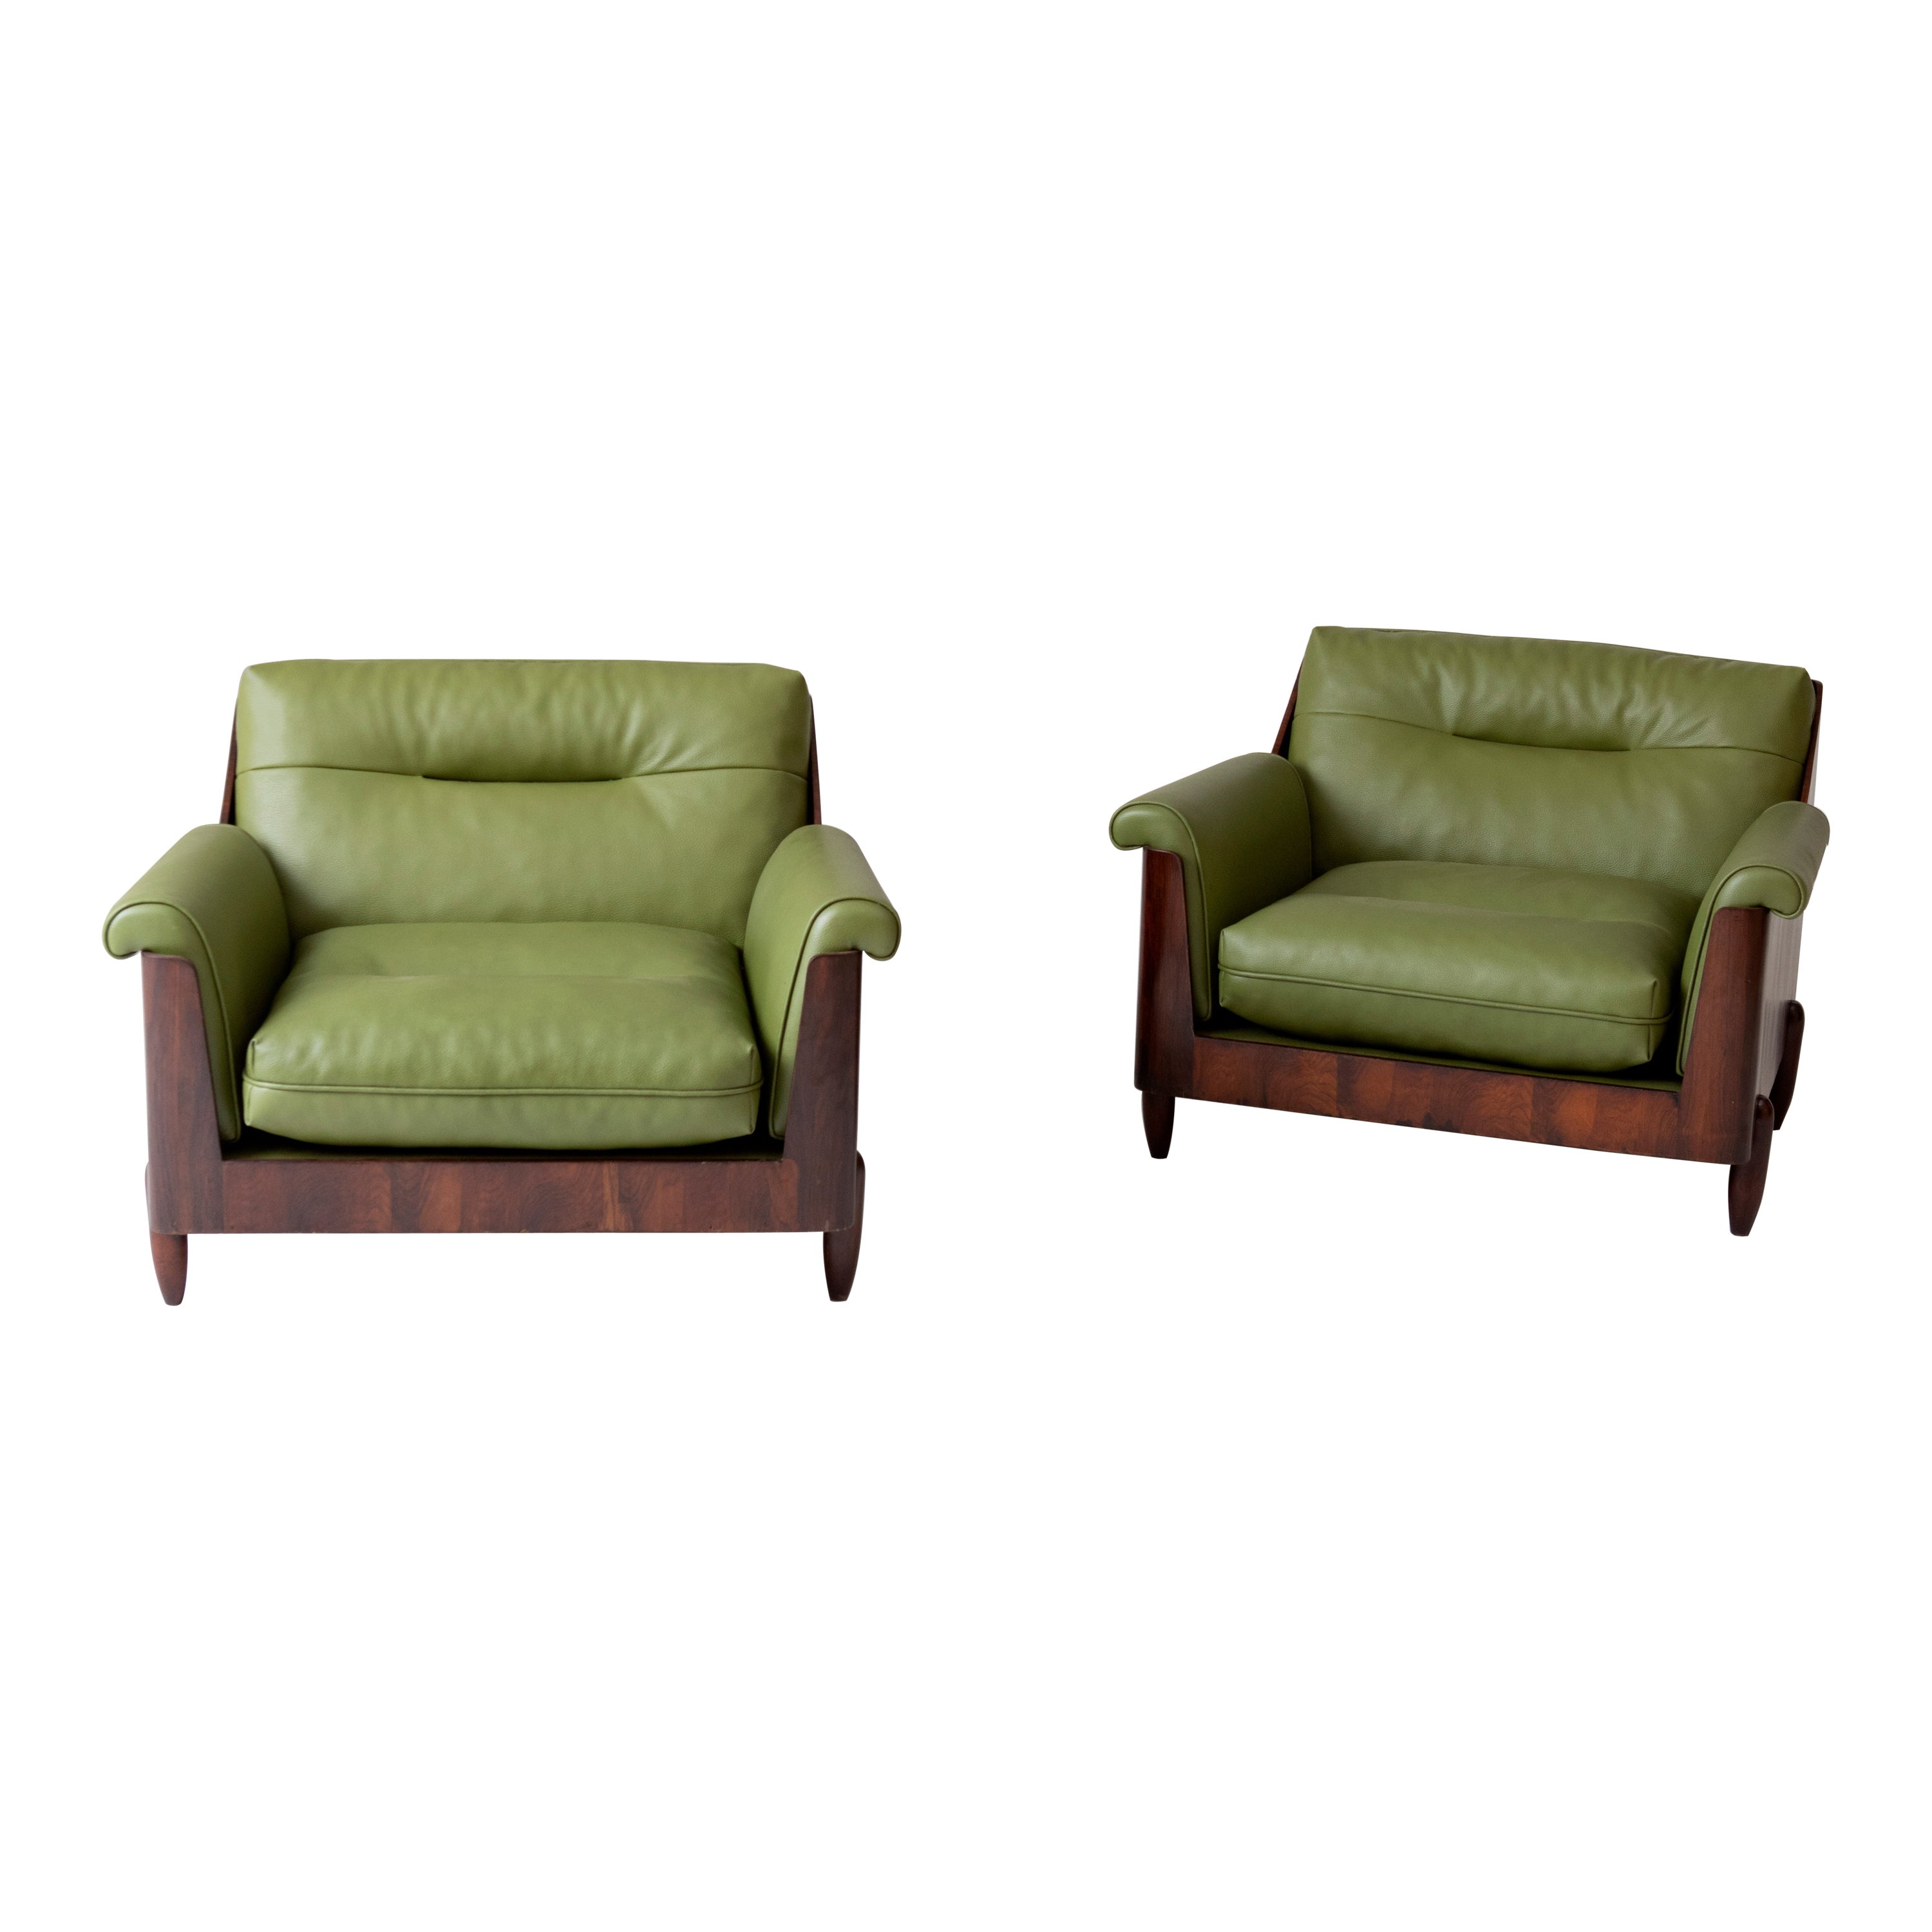 Mid-Century Modern Pair of Armchairs by Novo Rumo, 1960s For Sale